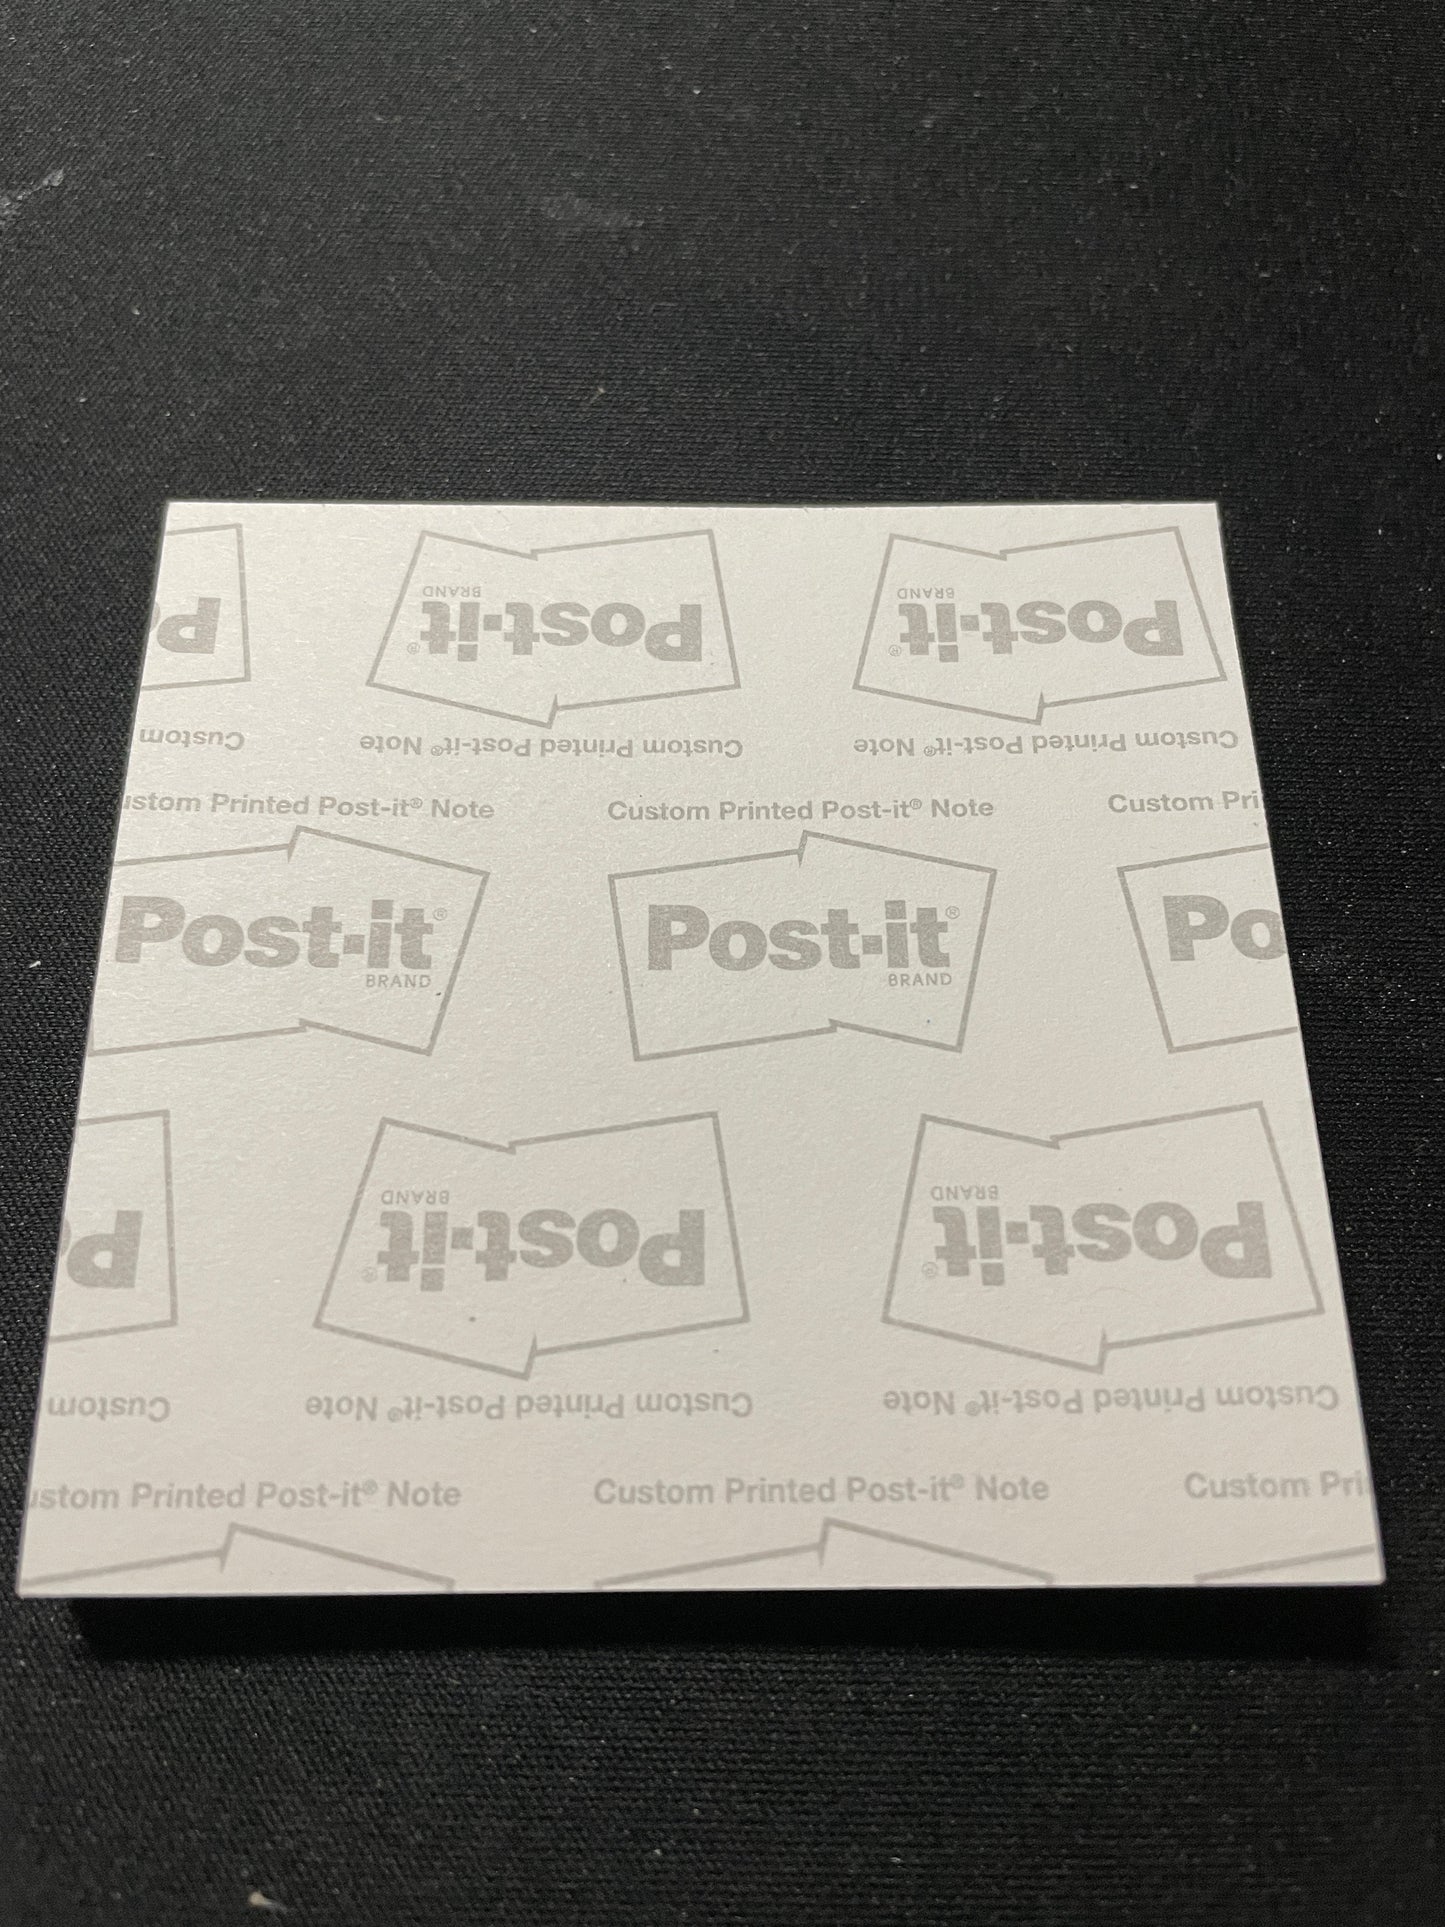 post it note - dungeons and dragons, D&D, tabletop, stats, one shot, dm gifts, tabletop gifts, role play, dungeon crawl, dungeon master, sticky note, stickynote, postit note, custom post it notes, post it brand, designed by me